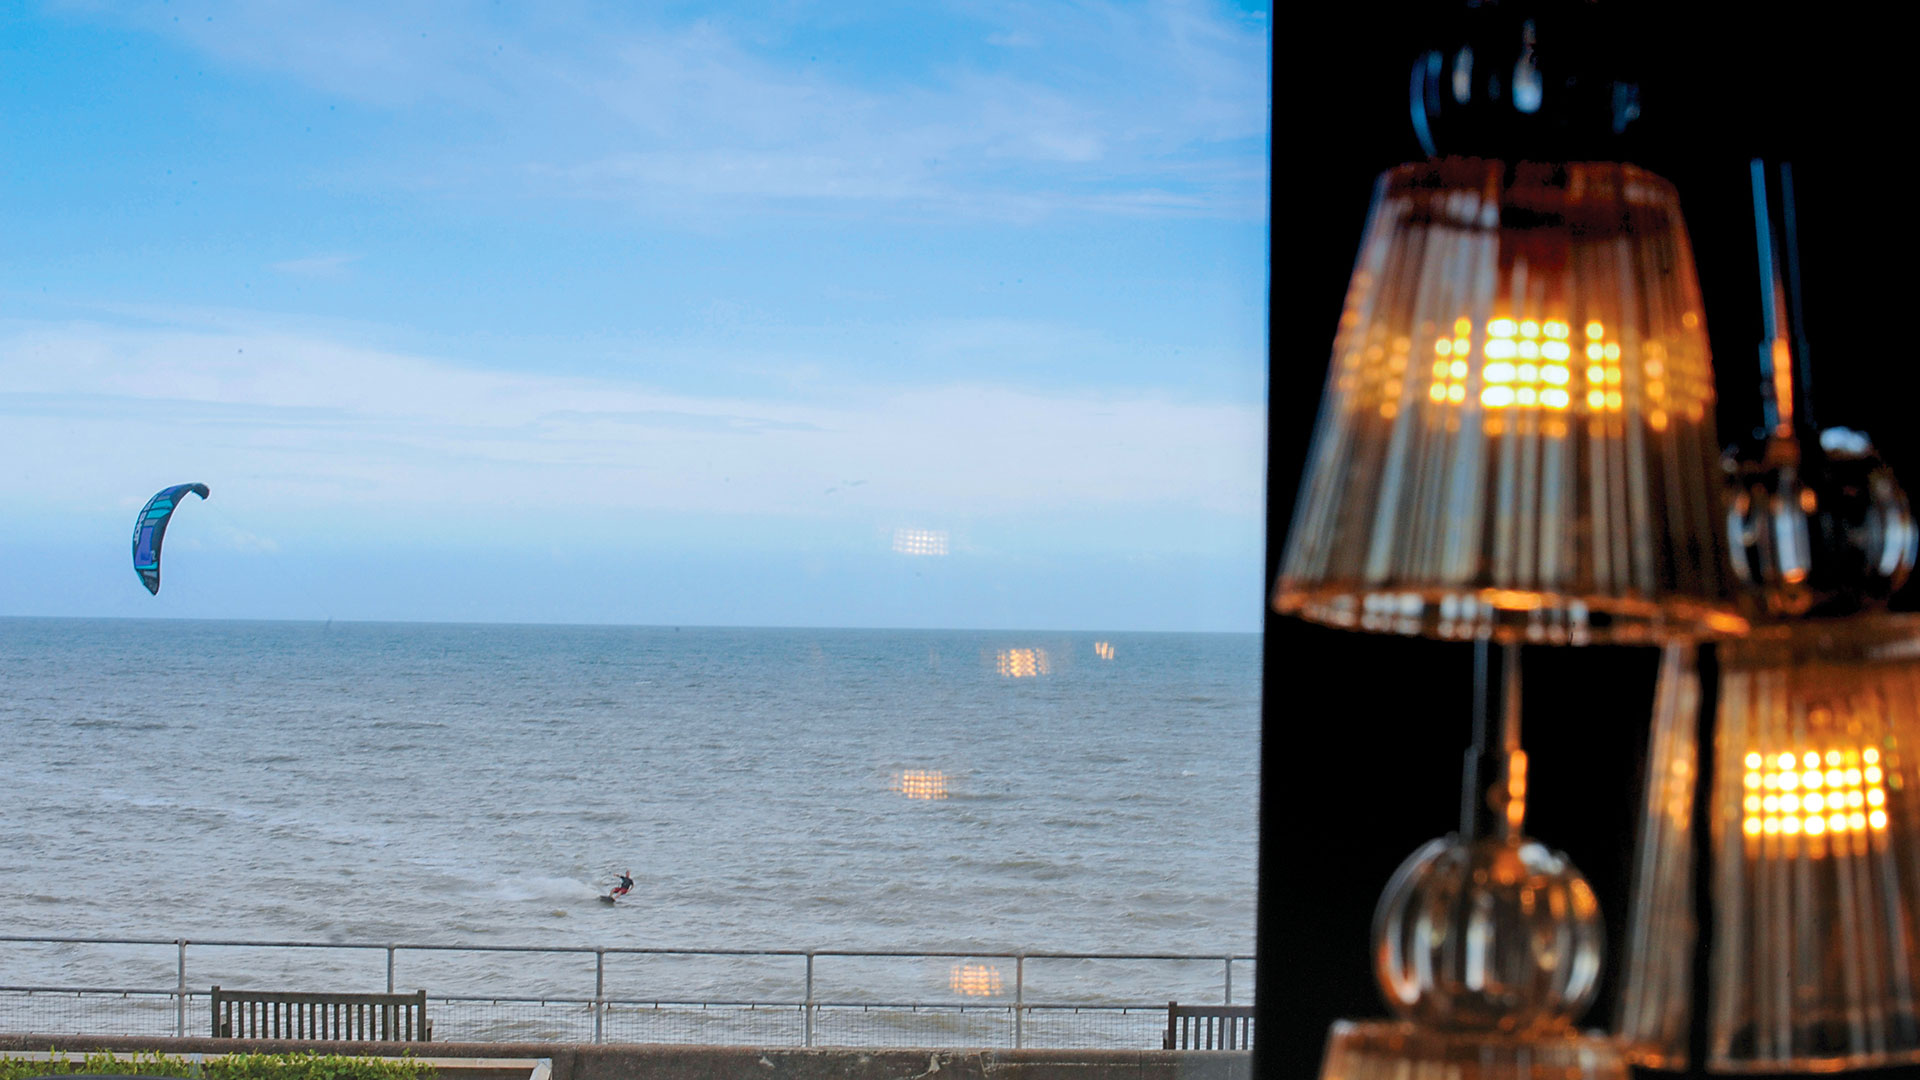 Windsurfing in the sea - Hythe Imperial Hotel, Spa & Golf, Hythe, Kent